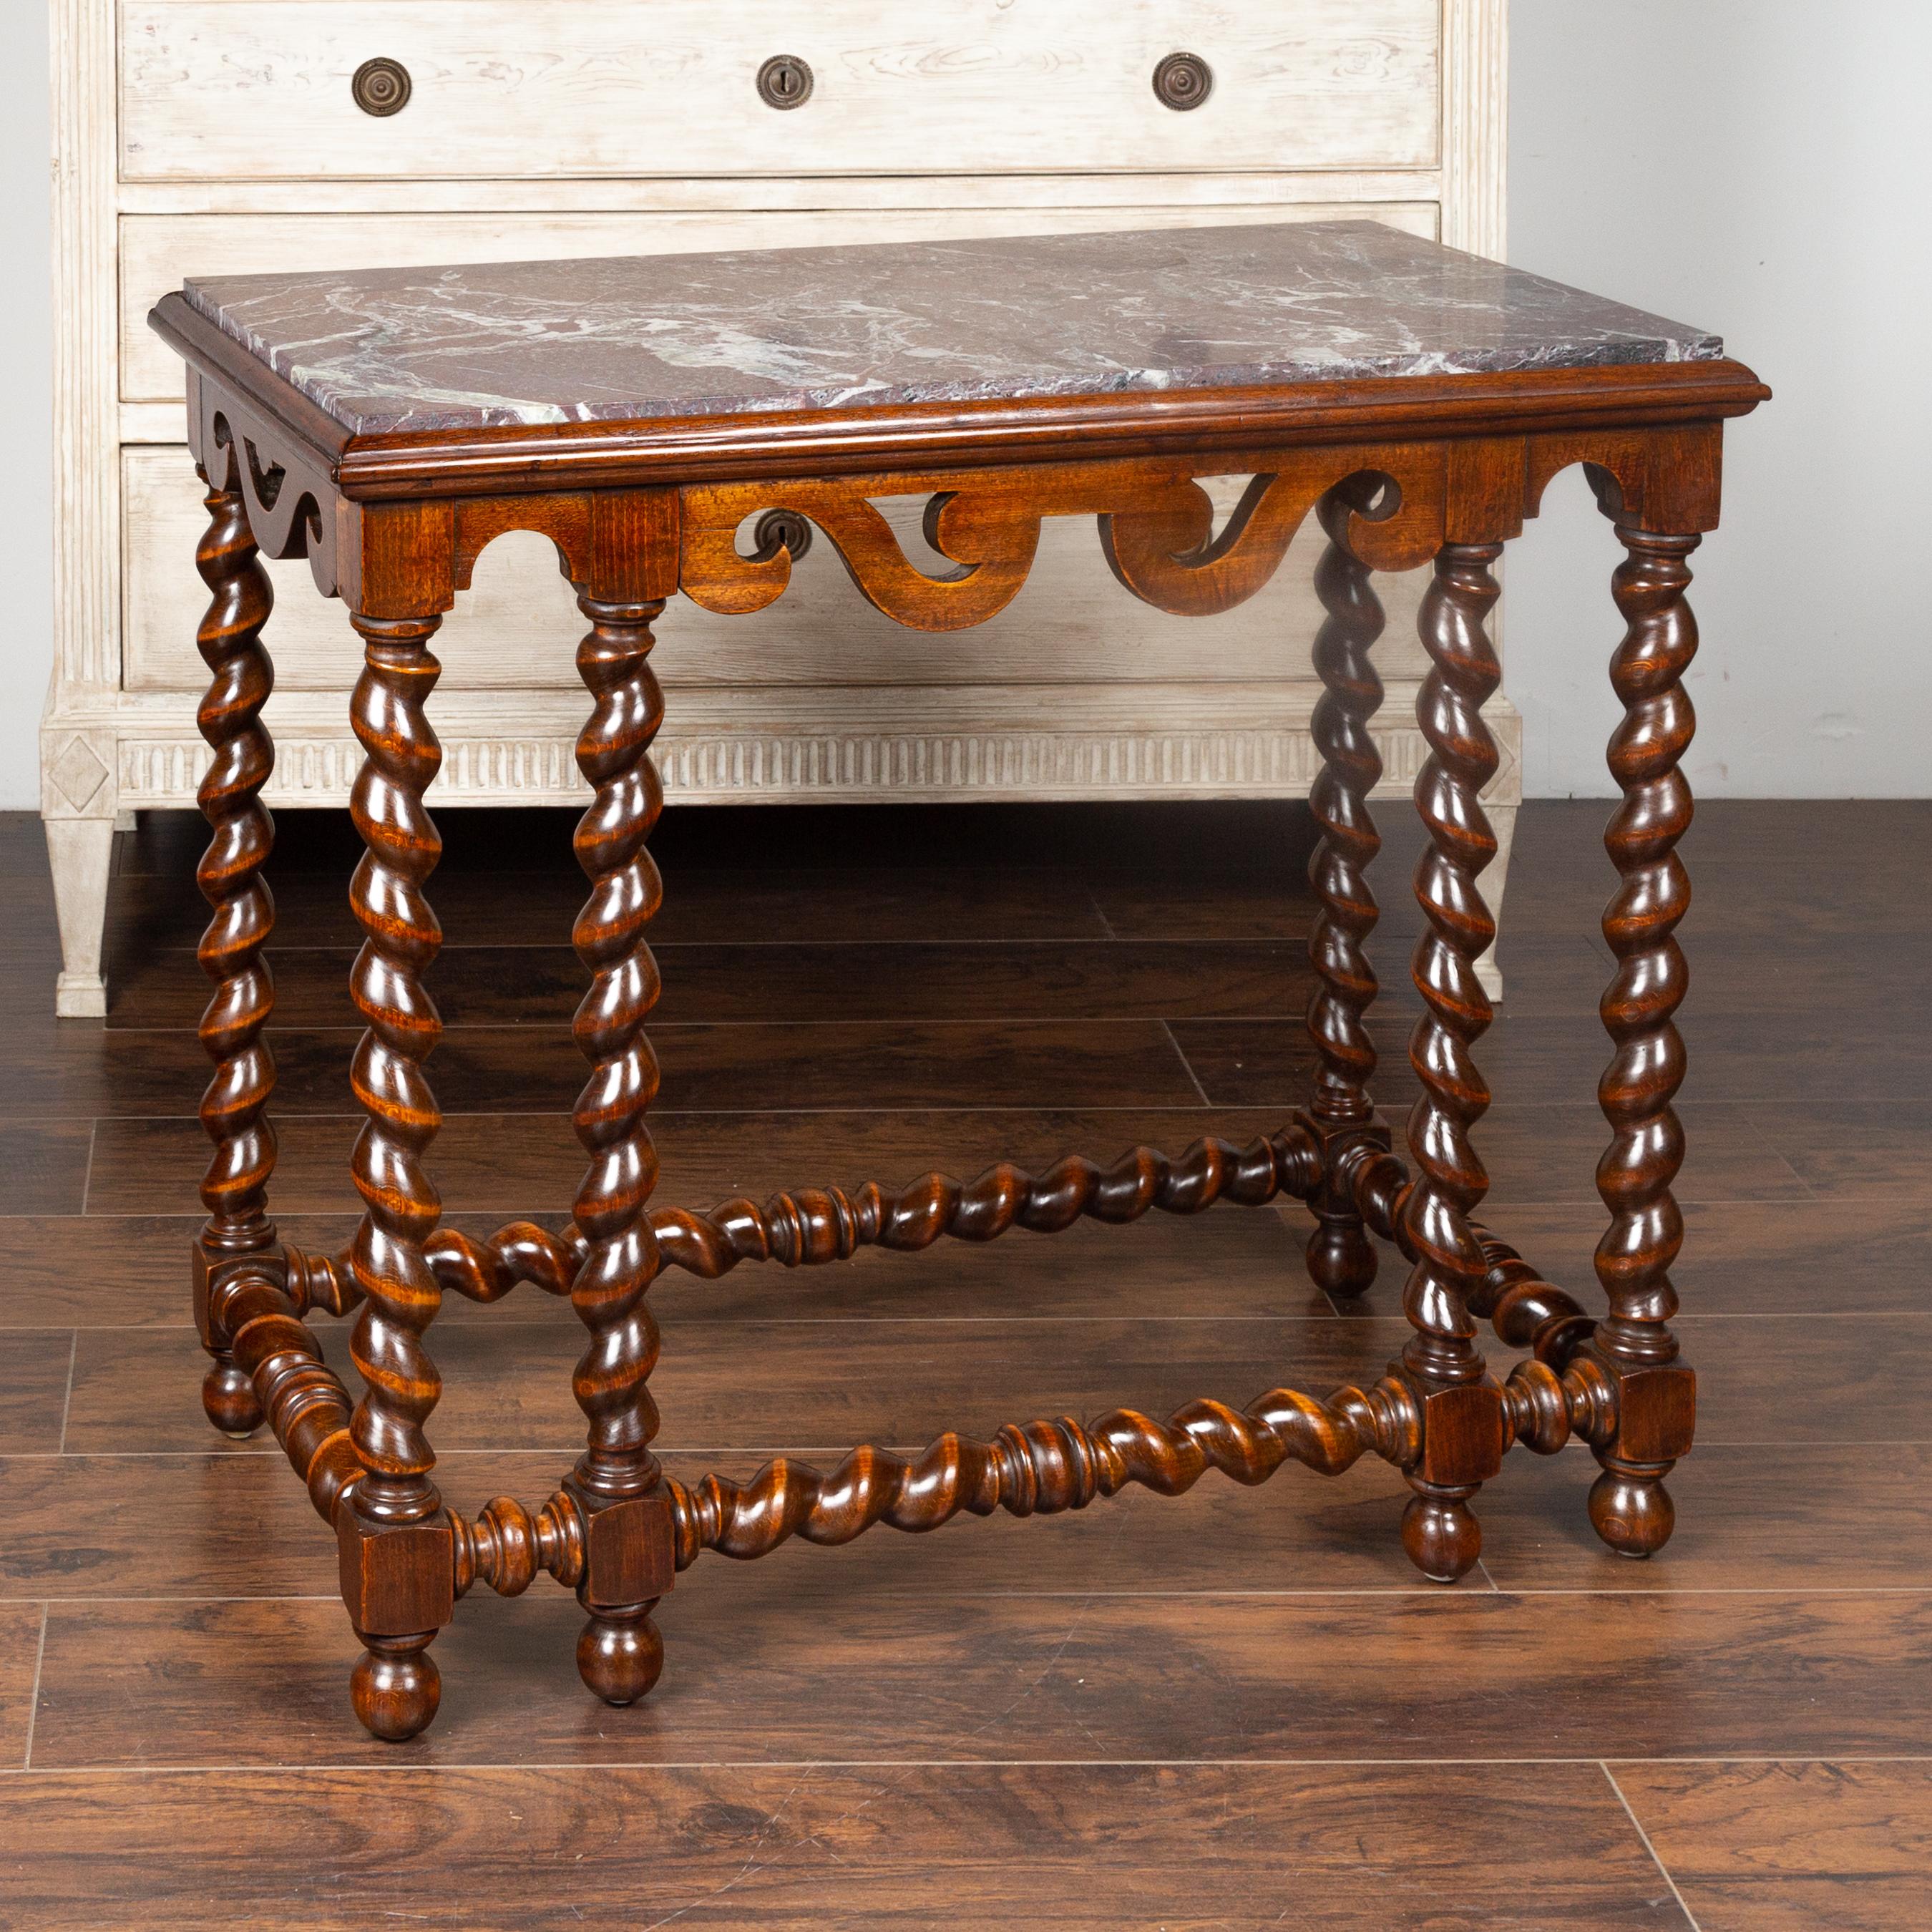 An English barley twist mahogany console table from the mid-19th century, with red marble top. Born in England during the mid-19th century, this exquisite console table features a rectangular red veined marble top inset sitting above an apron carved